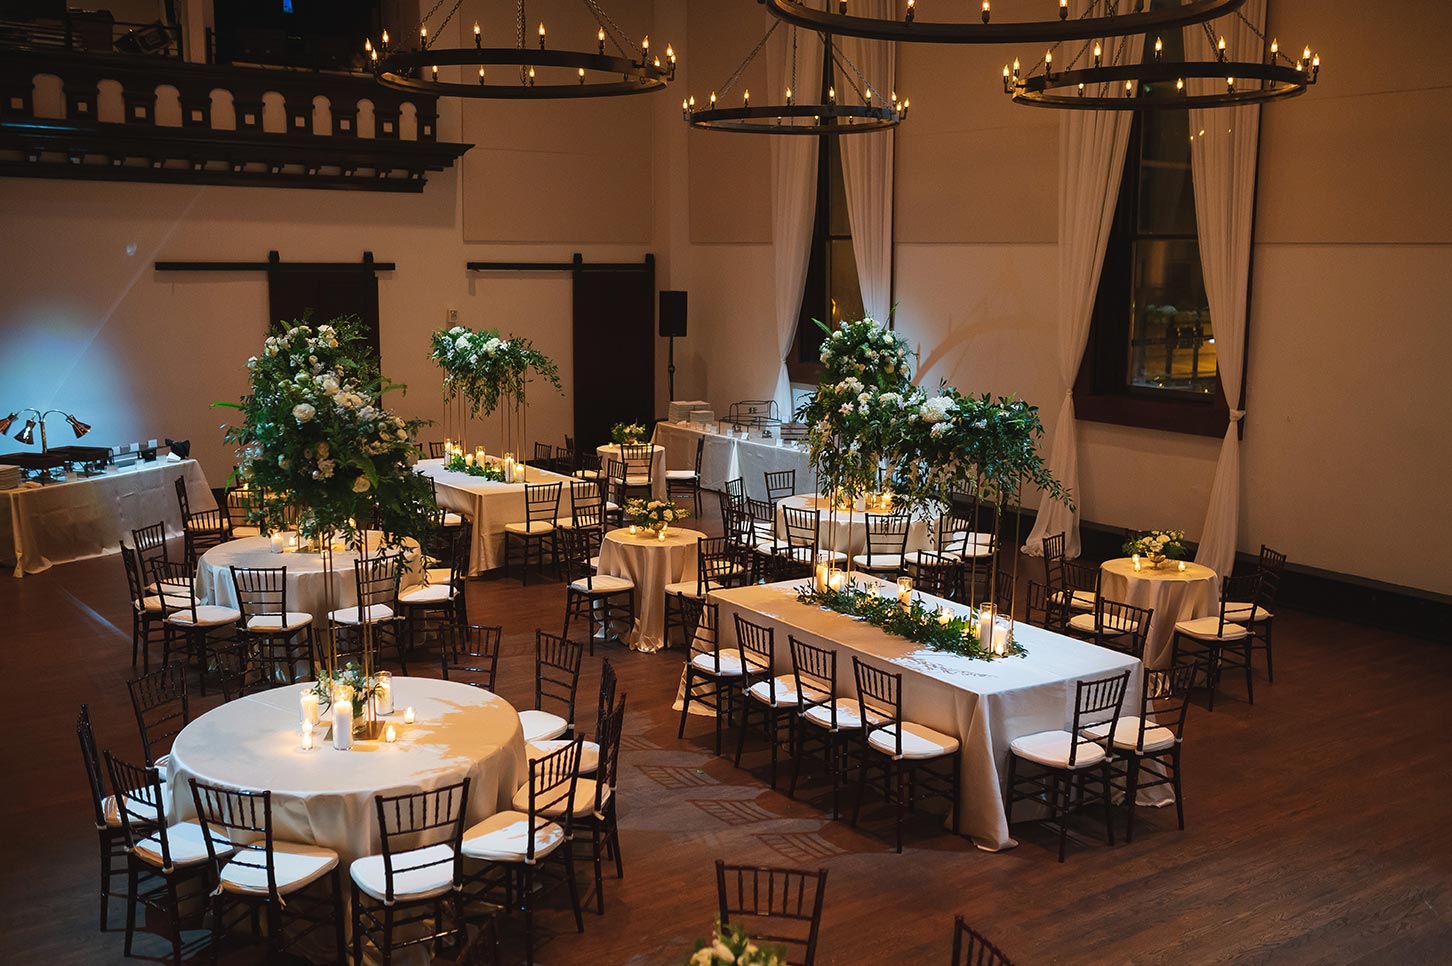 Reception with white linens elevated floral centerpieces and hanging goblet chandeliers